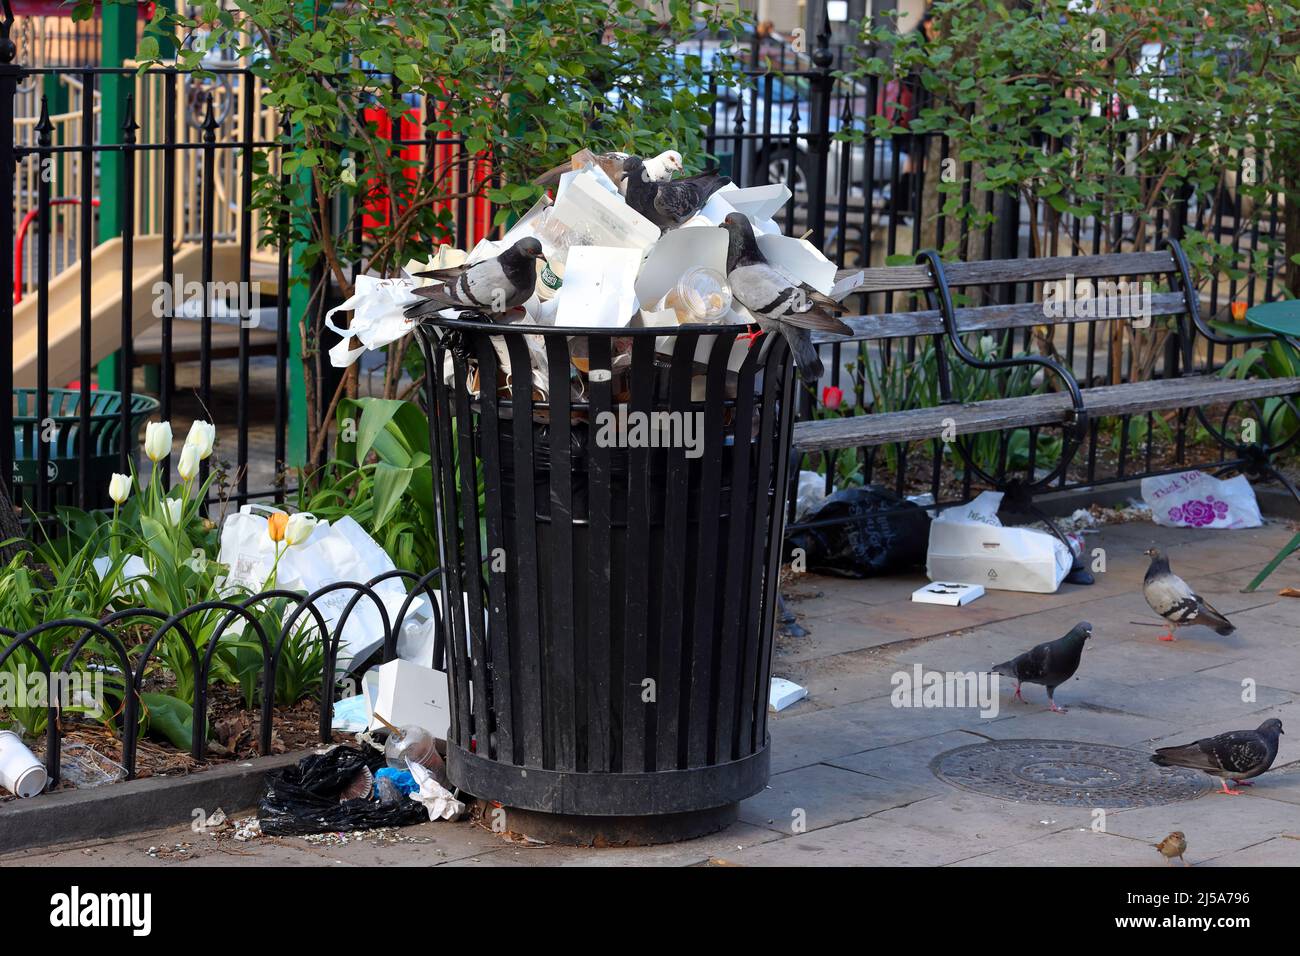 Pigeons swarm an overfilled trash can filled with discarded bakery food containers at Bleecker Playground in Manhattan's West Village, New York. Stock Photo